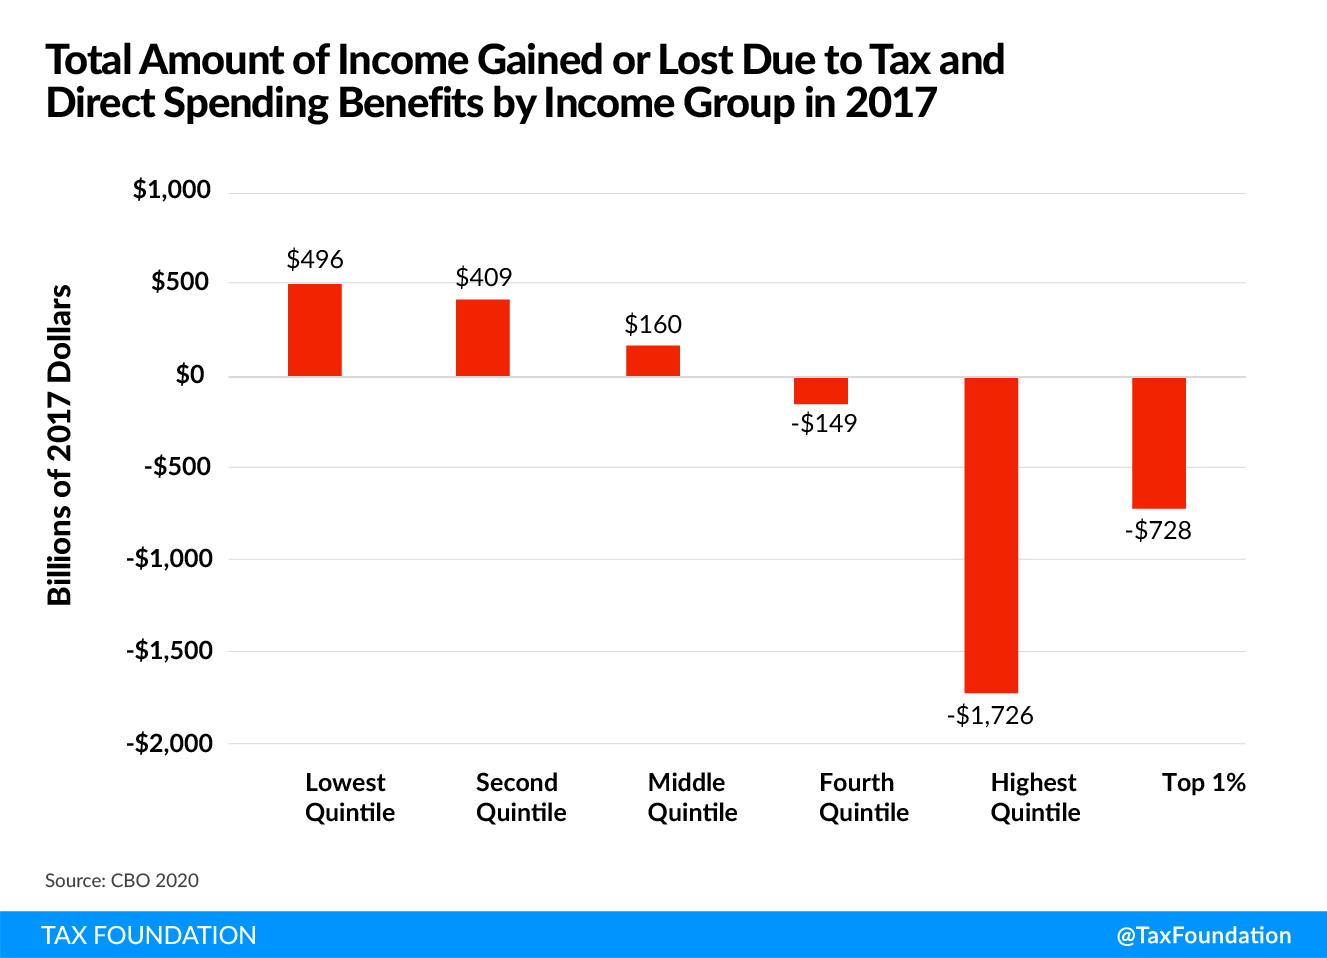 Millions of Americans are off the tax rolls (tax returns, tax refunds, and tax liability due to tax credits and deductions) Tax Fairness, Economic Growth, and Funding Government Investments (Fairer Tax System)